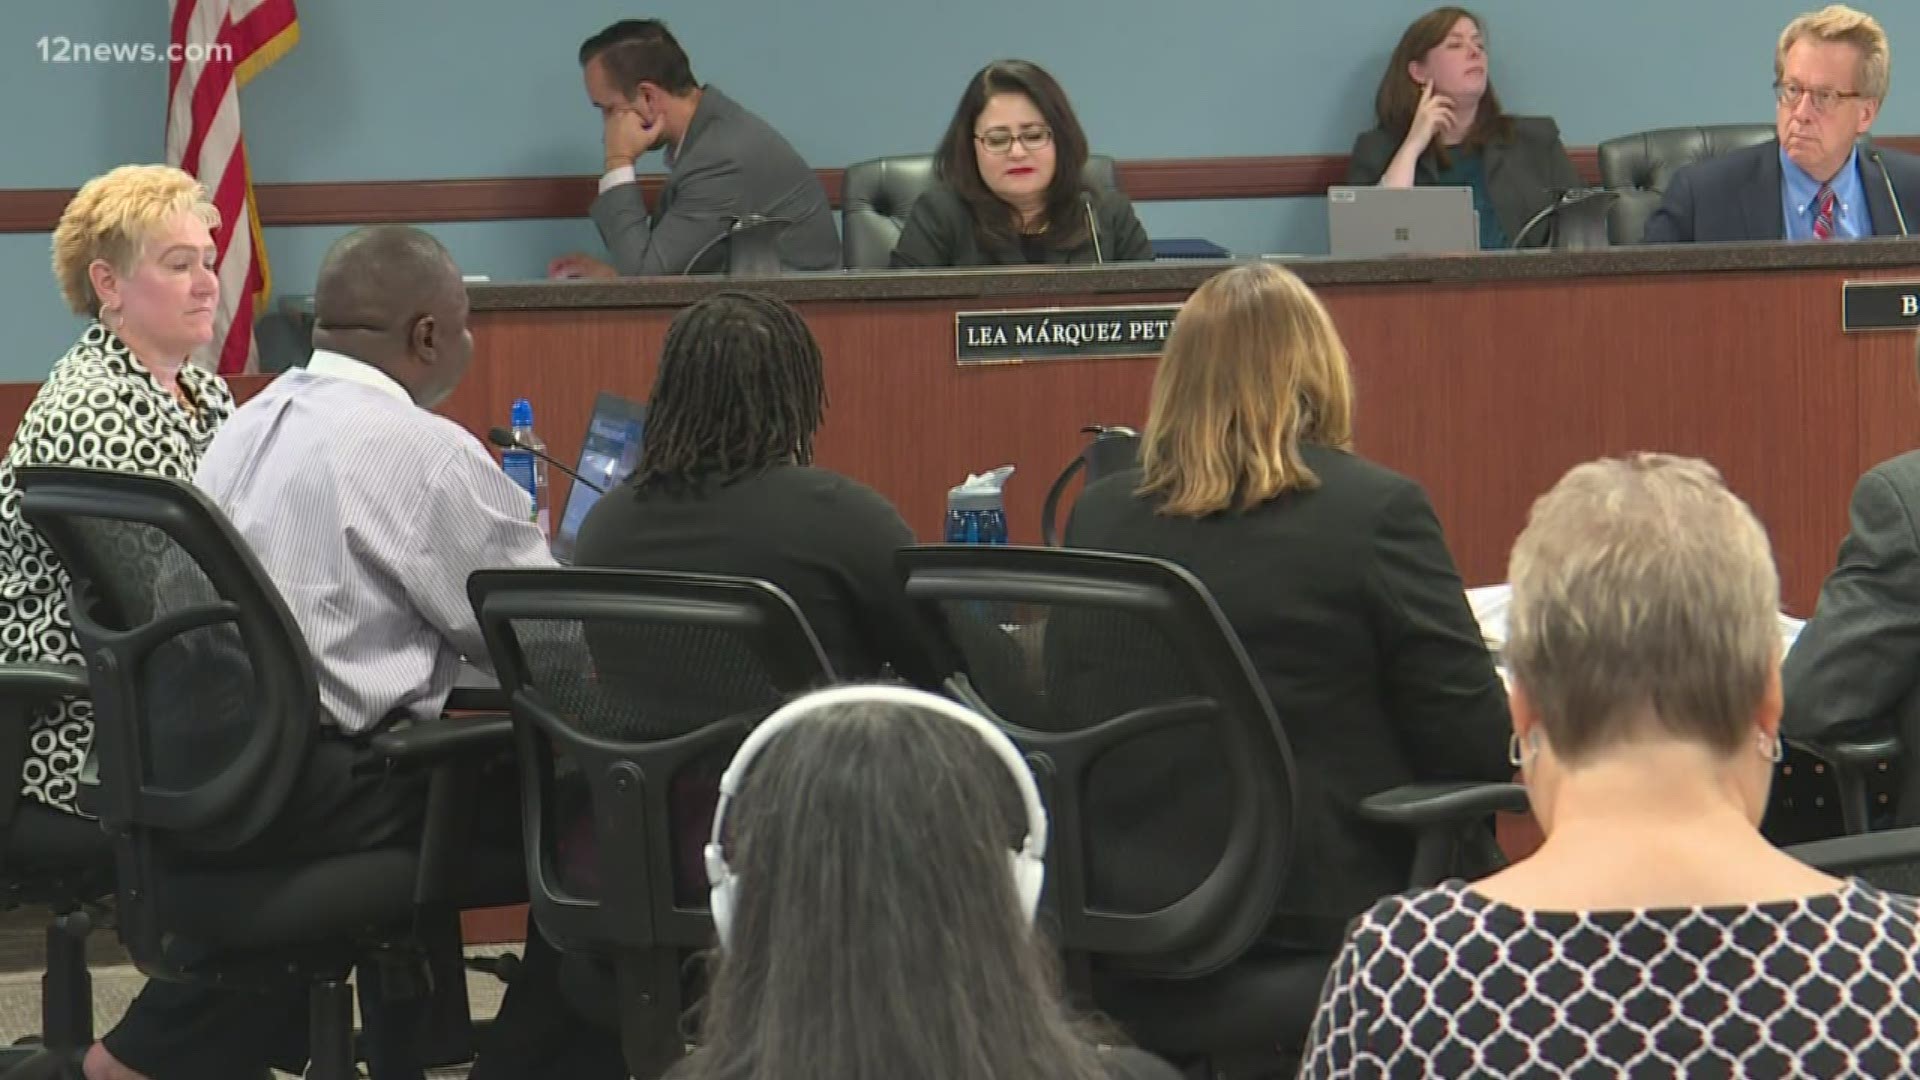 Corporation commissioners took public comment Monday on when, how and even if public utilities should disconnect customers who have fallen behind on payments.